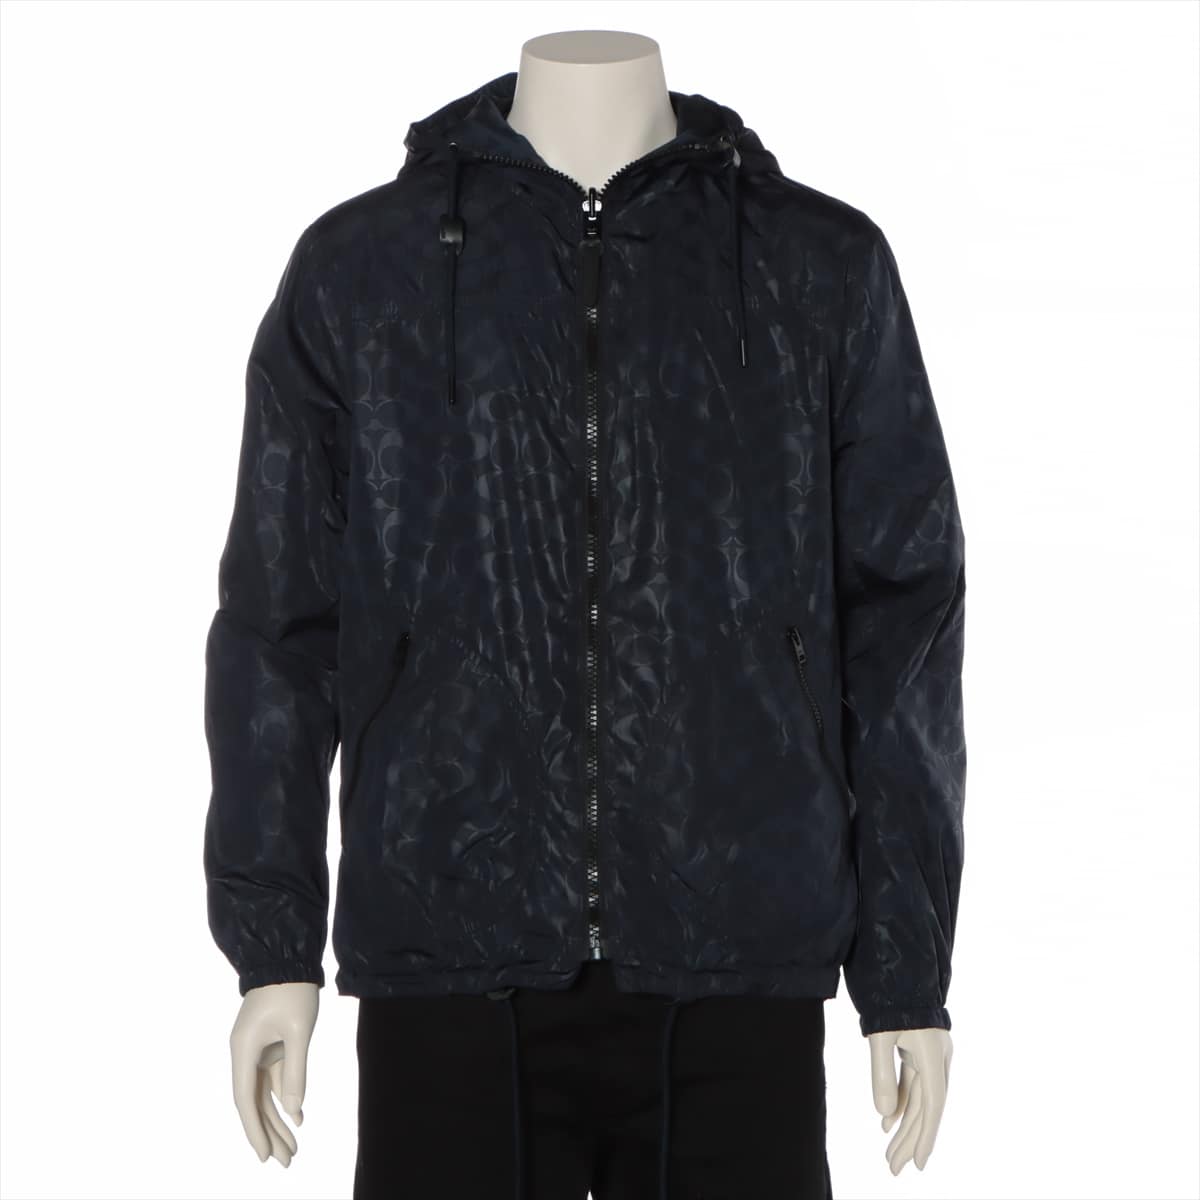 COACH Signature Polyester Jacket Unknown size Men's Navy blue  Reversible Missing size tag